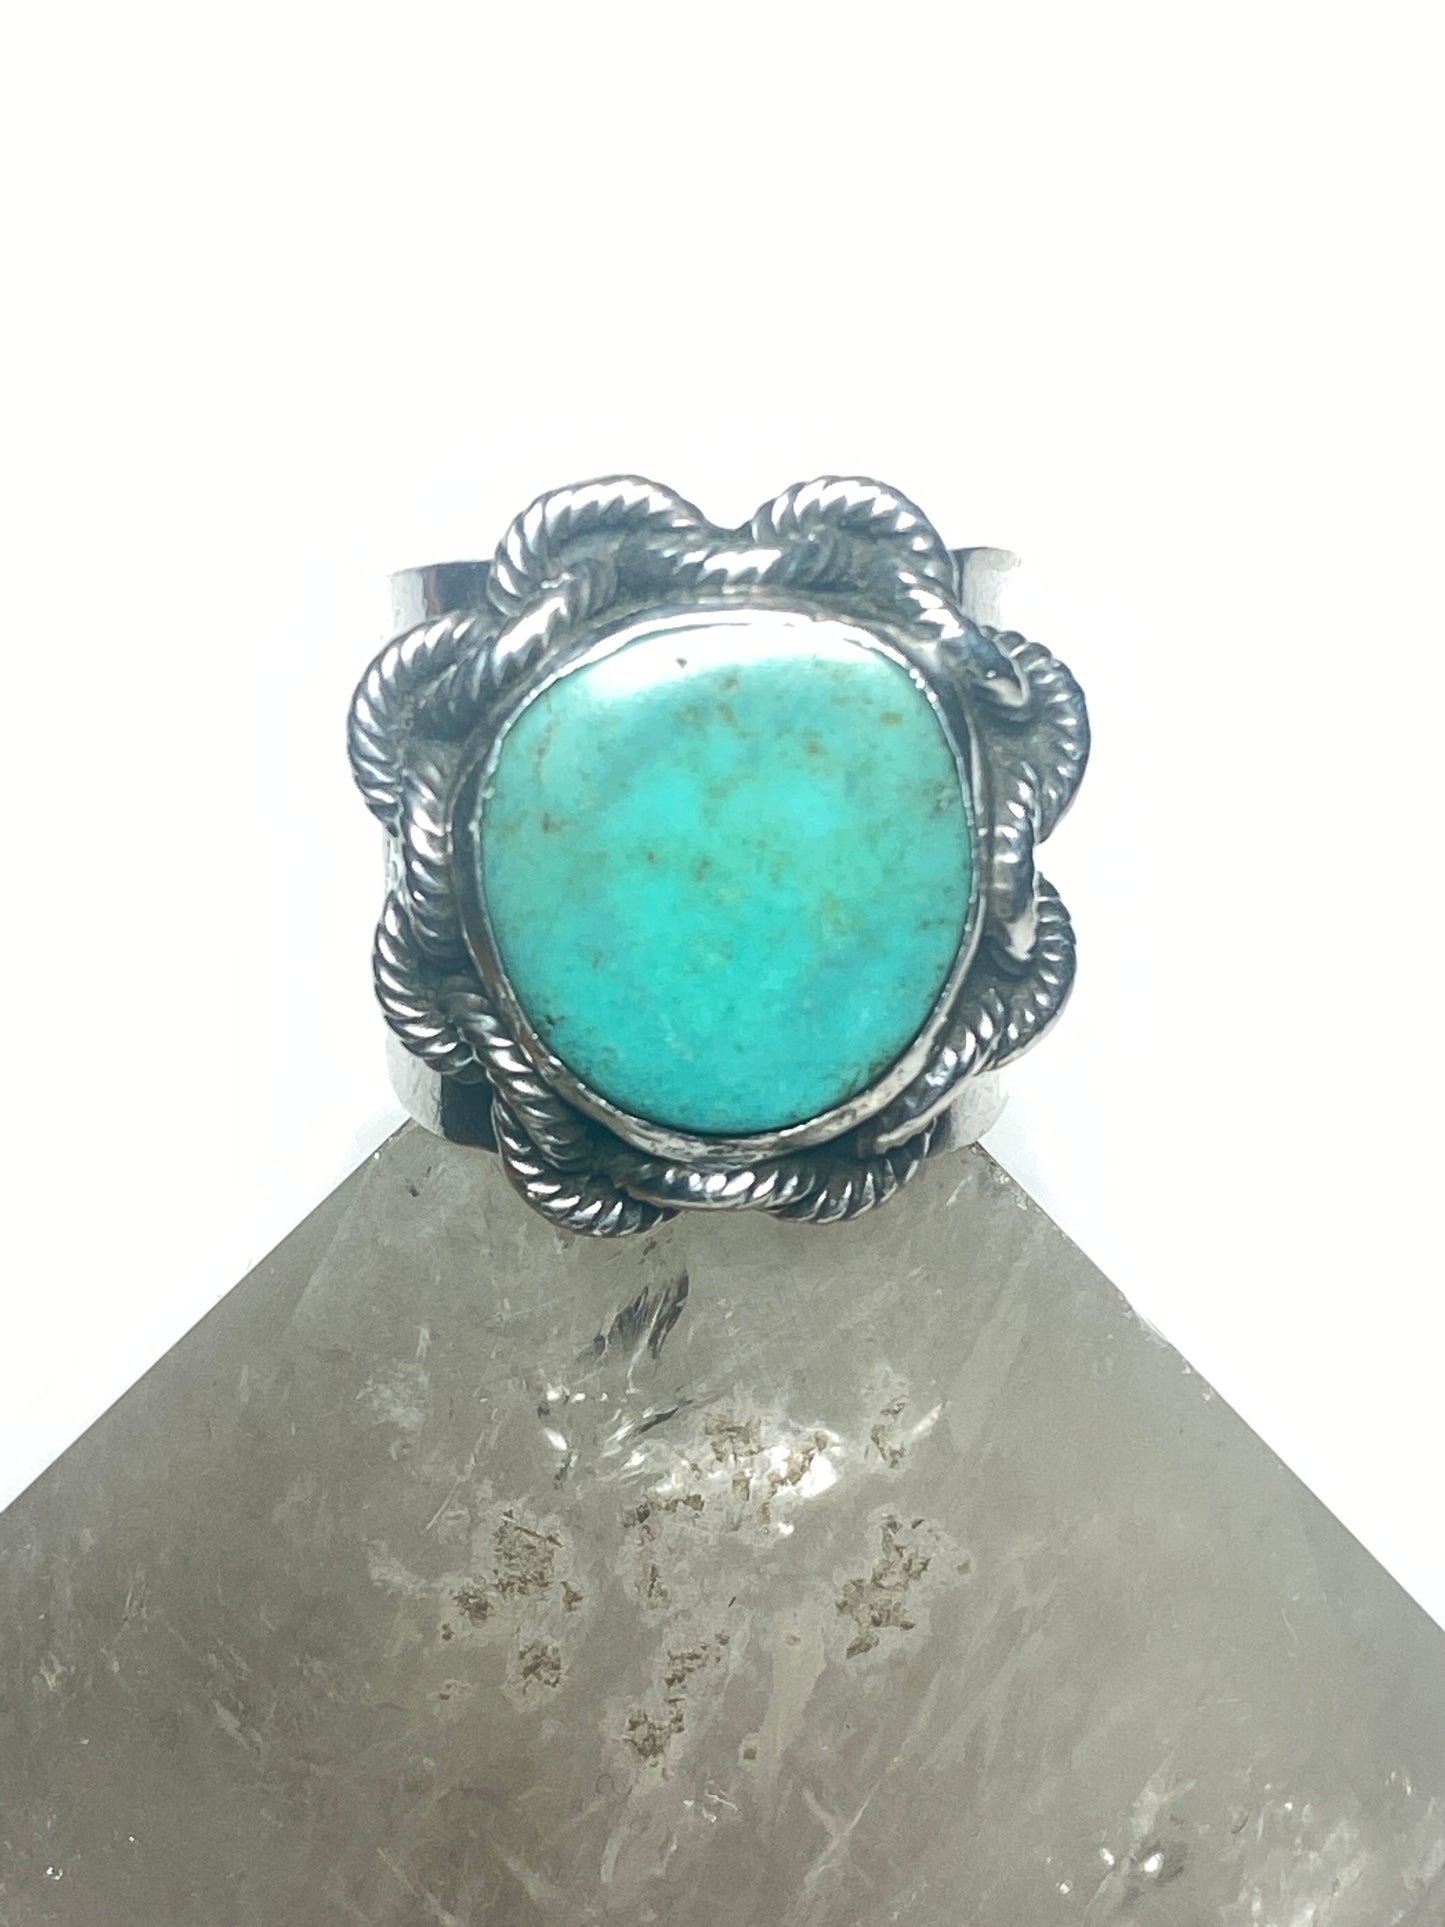 Turquoise ring Navajo chain band sterling silver women men